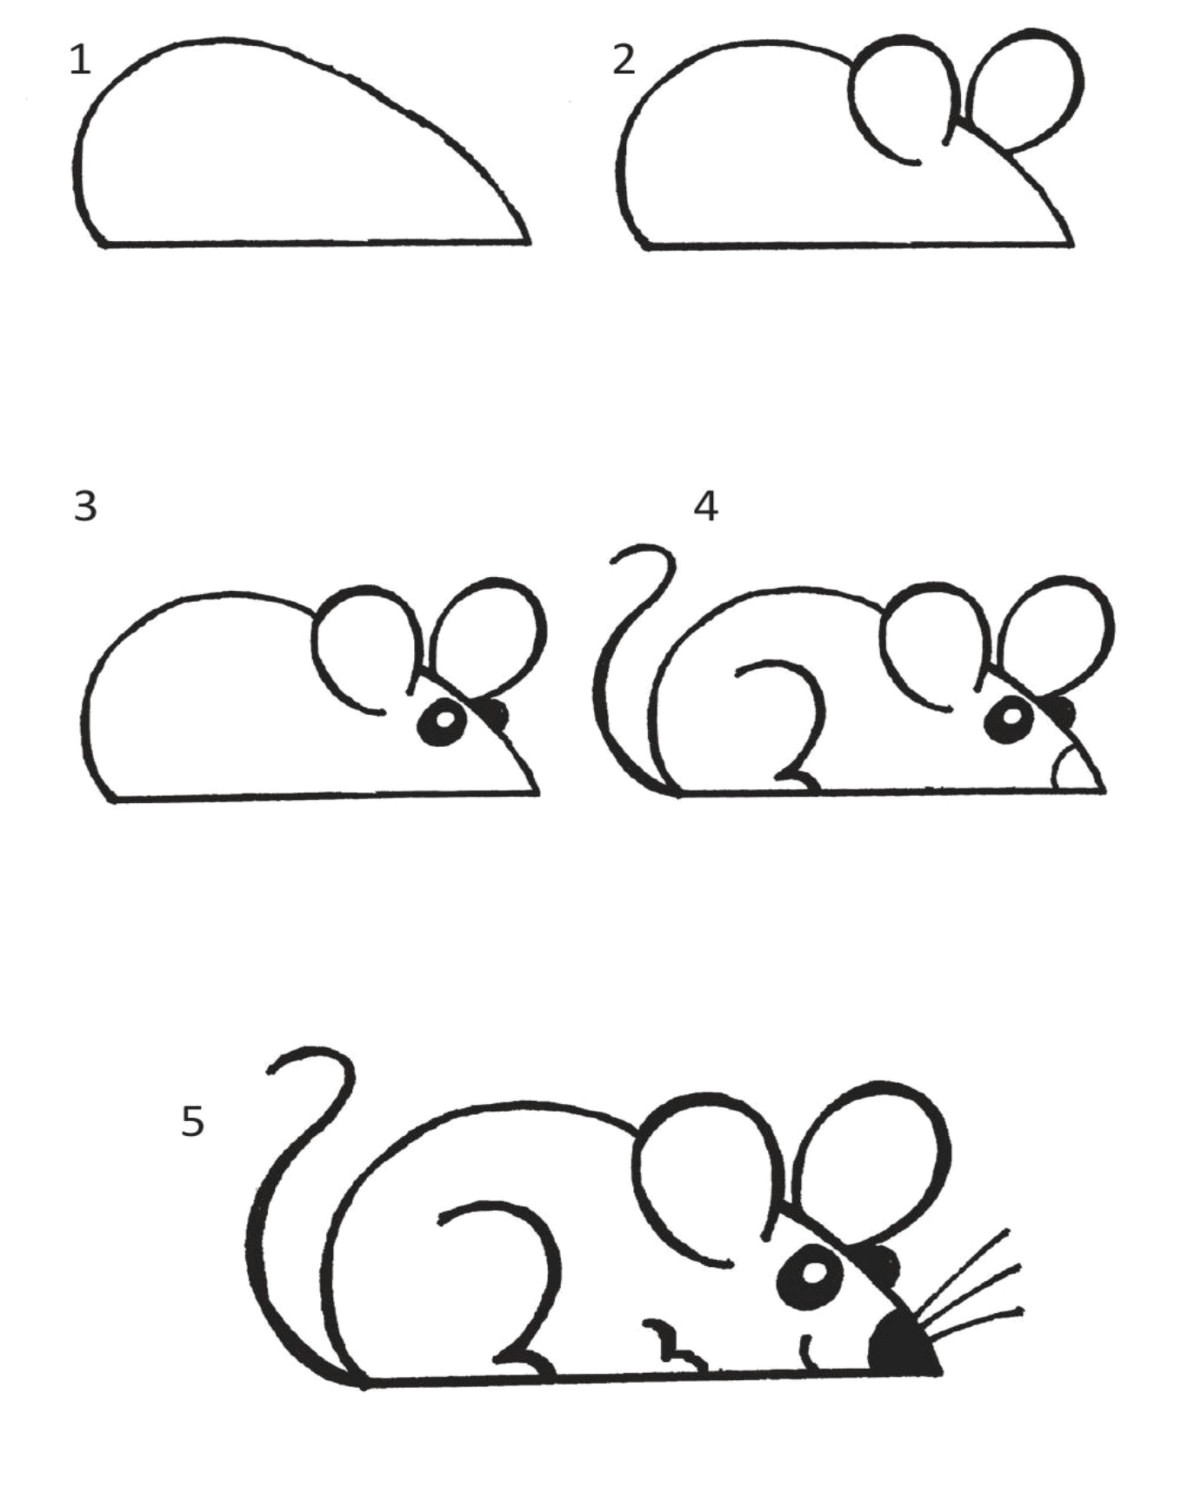 Easy How to Draw Cute Animals Geometric Animals Simple 2016 11 En Mus Step by Step Drawing